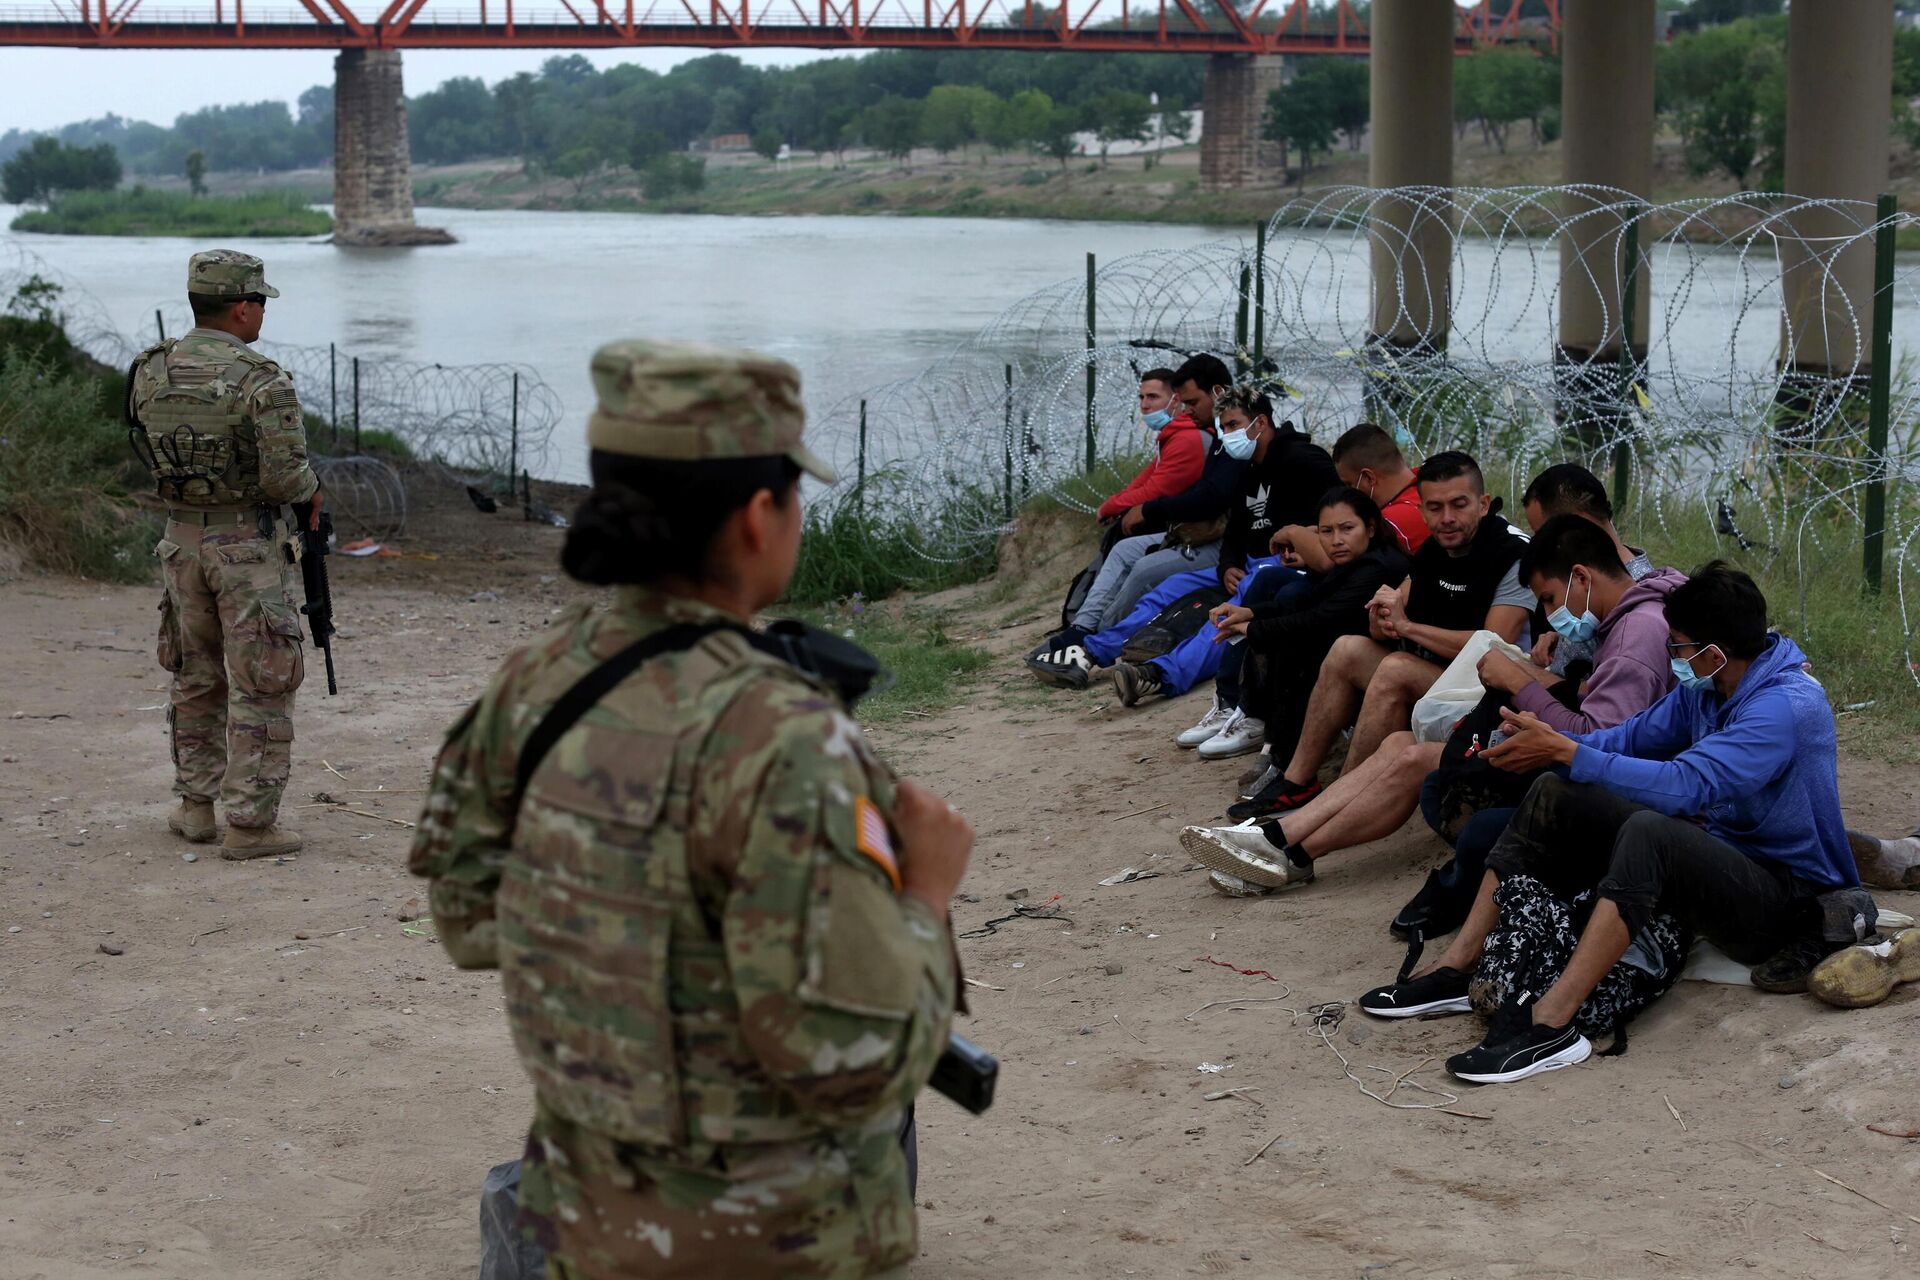 Migrants who had crossed the Rio Grande river into the U.S. are under custody of National Guard members as they await the arrival of U.S. Border Patrol agents in Eagle Pass, Texas, Friday, May 20, 2022 - Sputnik International, 1920, 21.09.2022